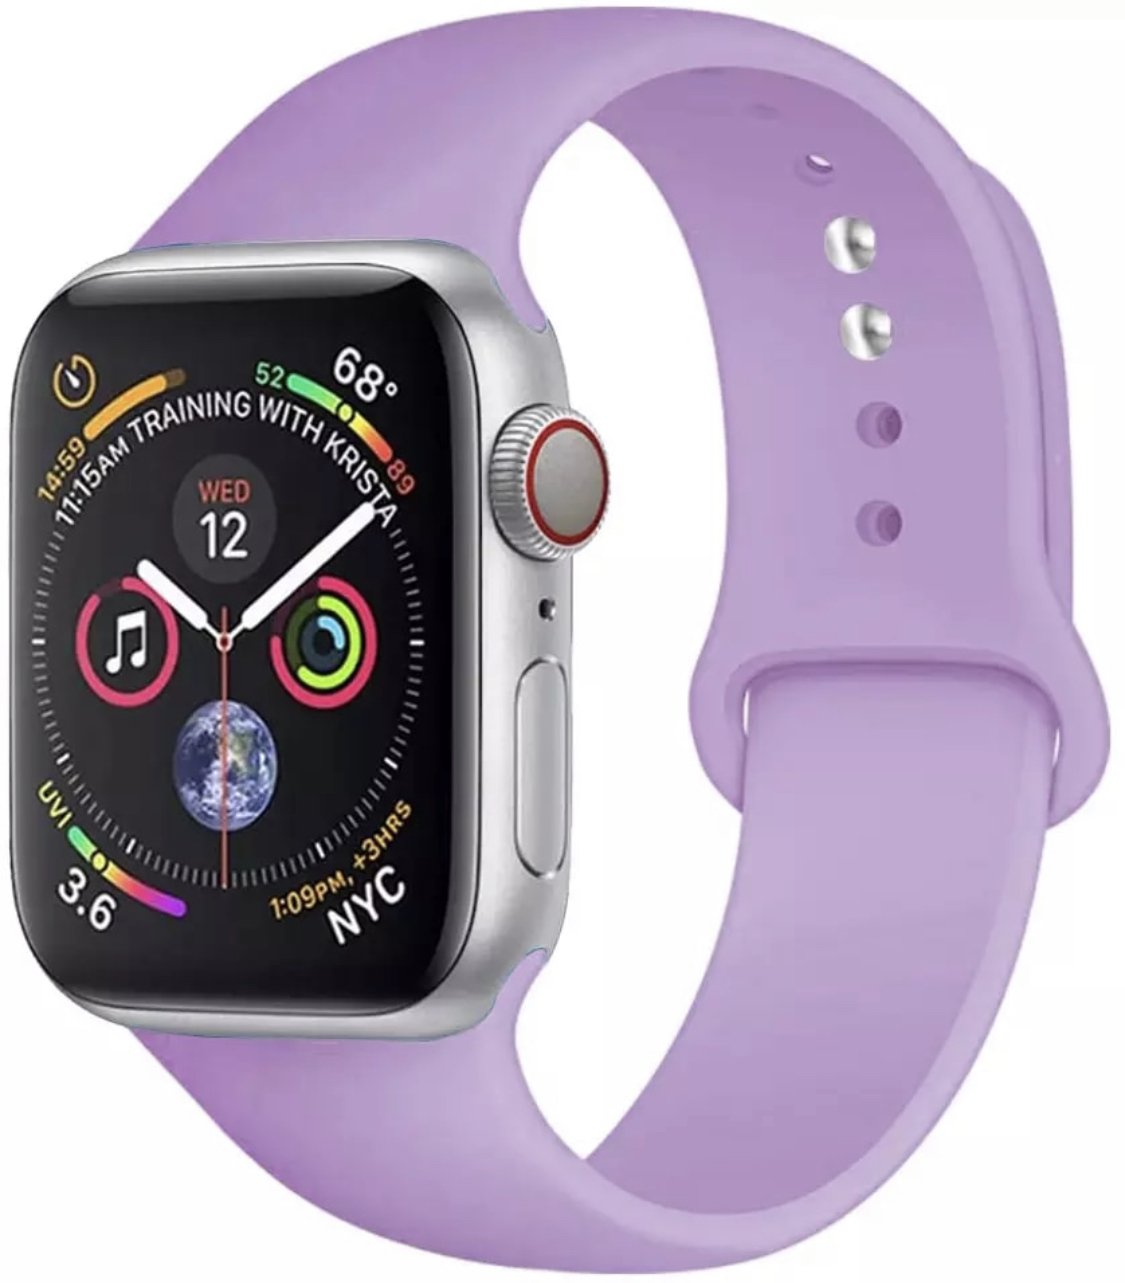 Blueberry Apple Watch Band